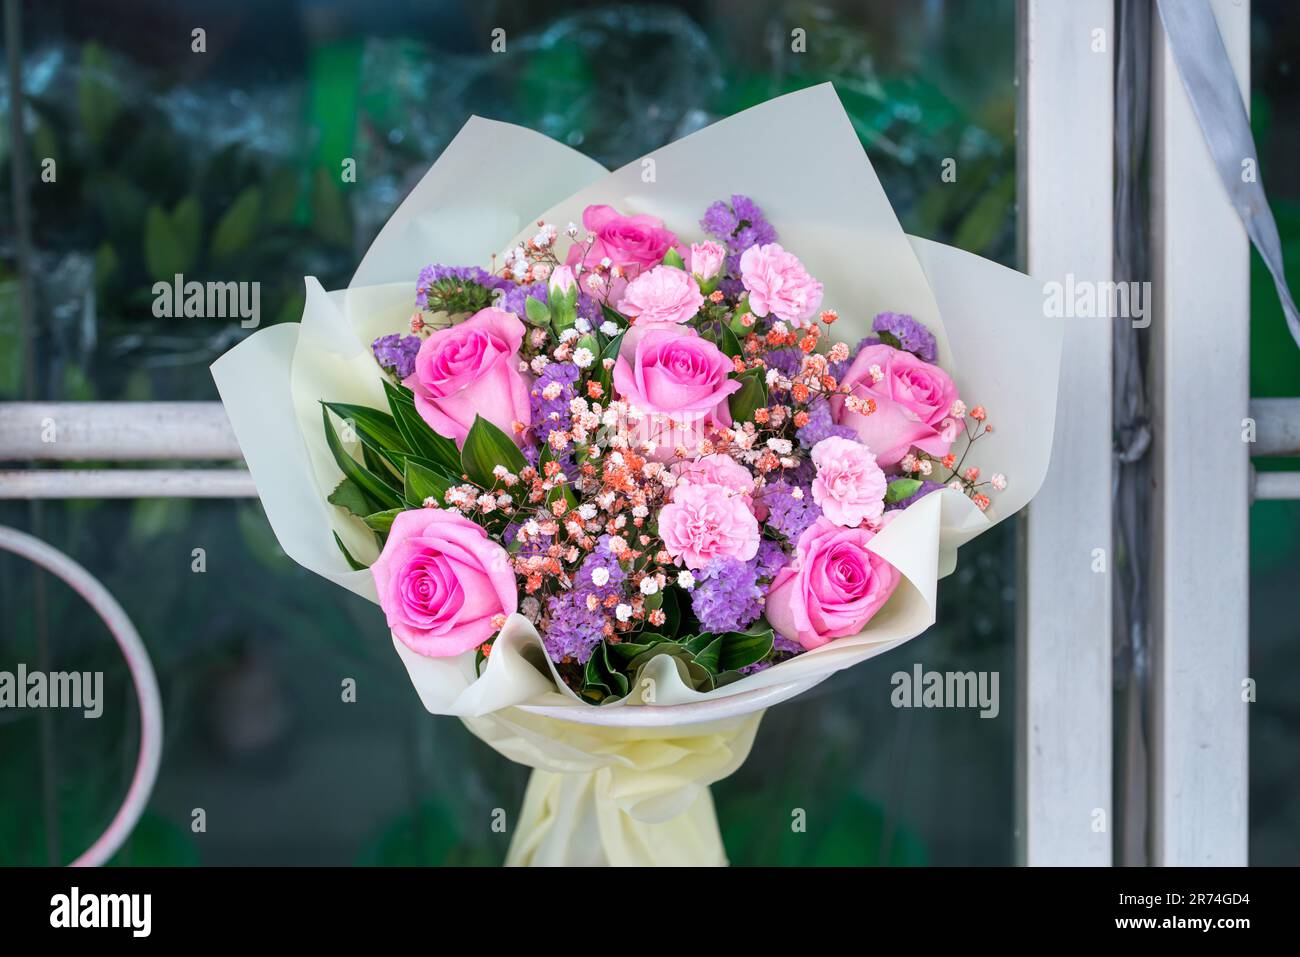 Beautiful bouquet of pink roses on display in a florist shop. Stock Photo